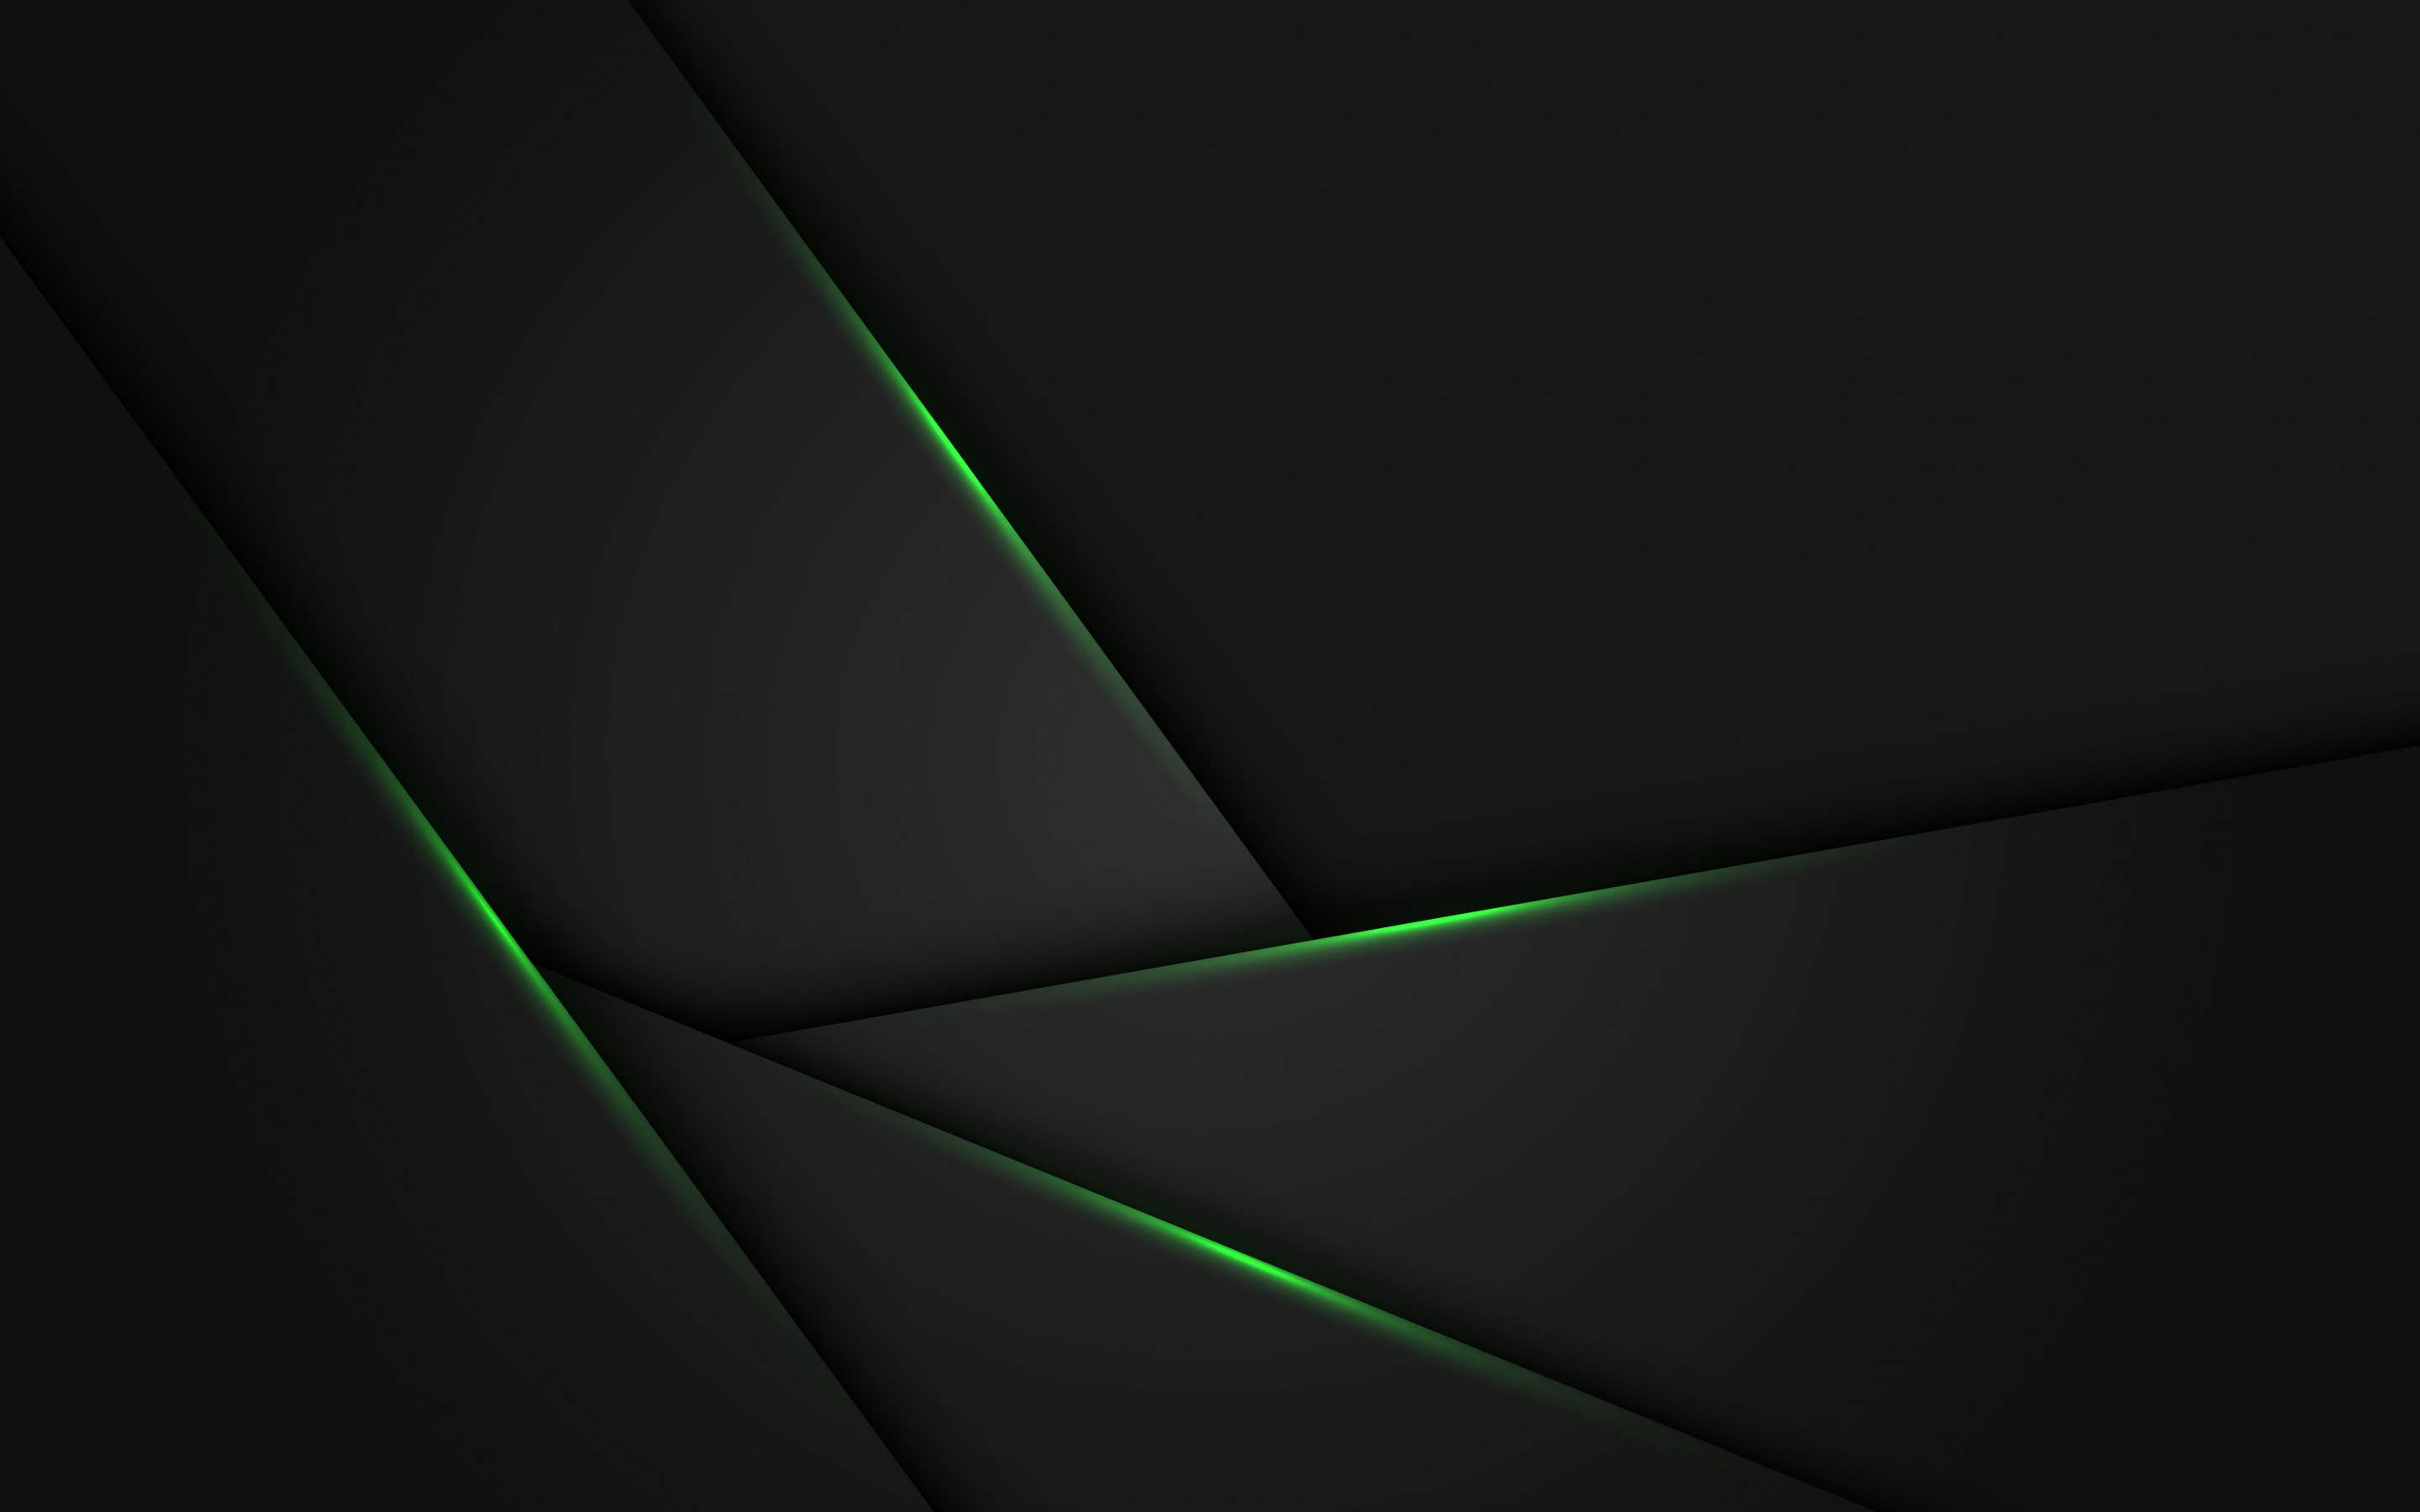 Download wallpaper black stylish background, green neon lines, green light effects, abstract black background for desktop with resolution 2880x1800. High Quality HD picture wallpaper